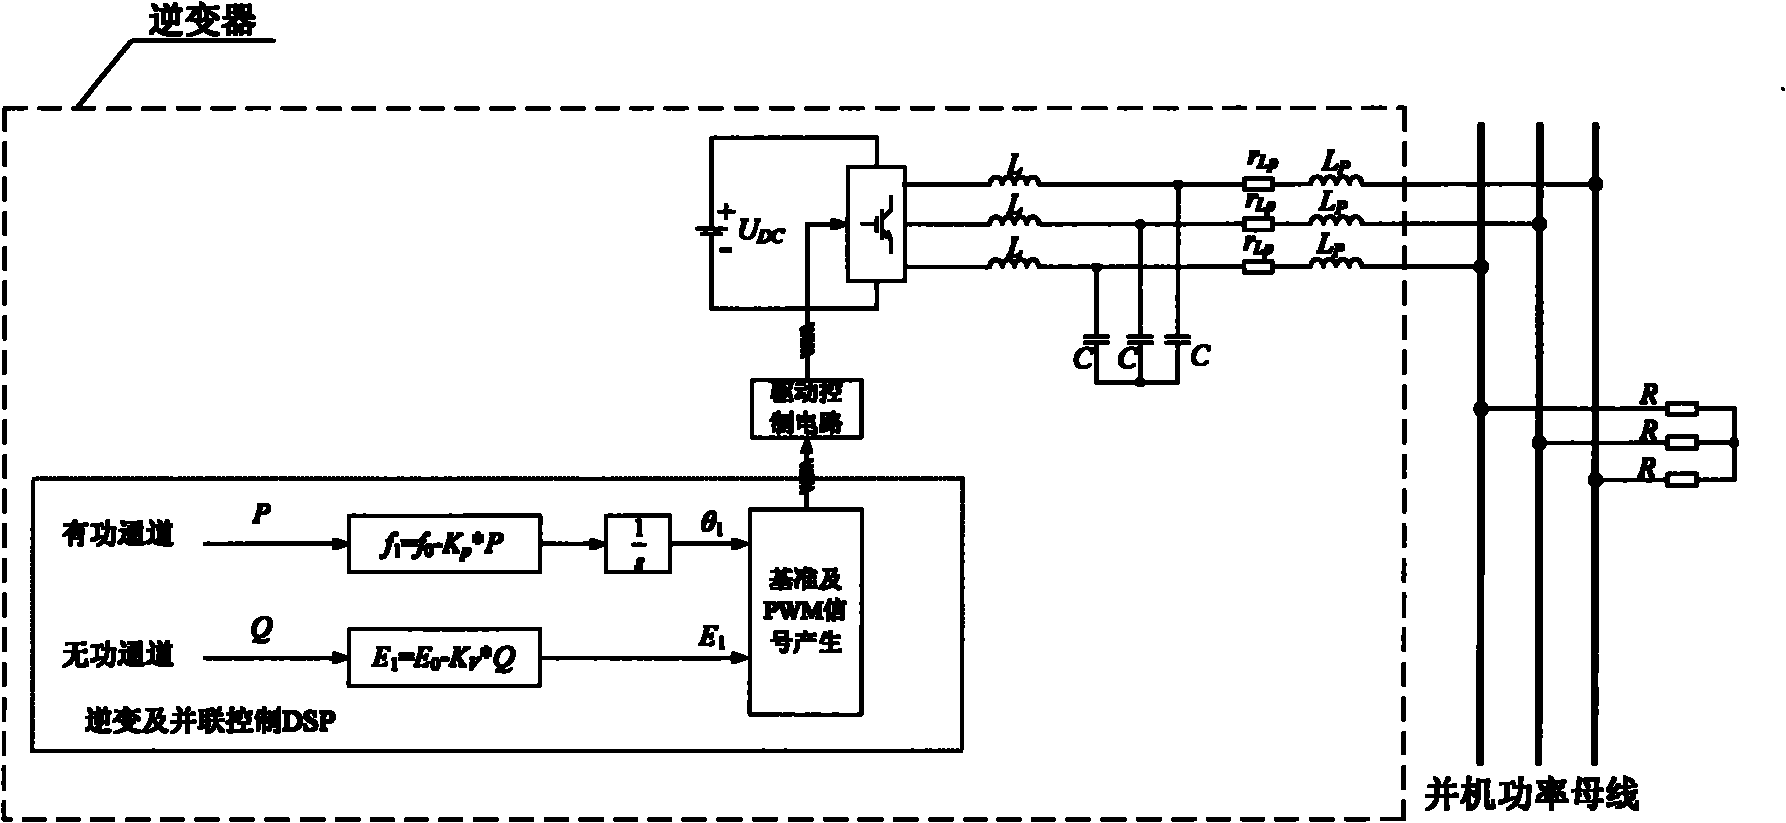 Three-phase inverter capable of working without parallel connection by interconnection lines and control method thereof